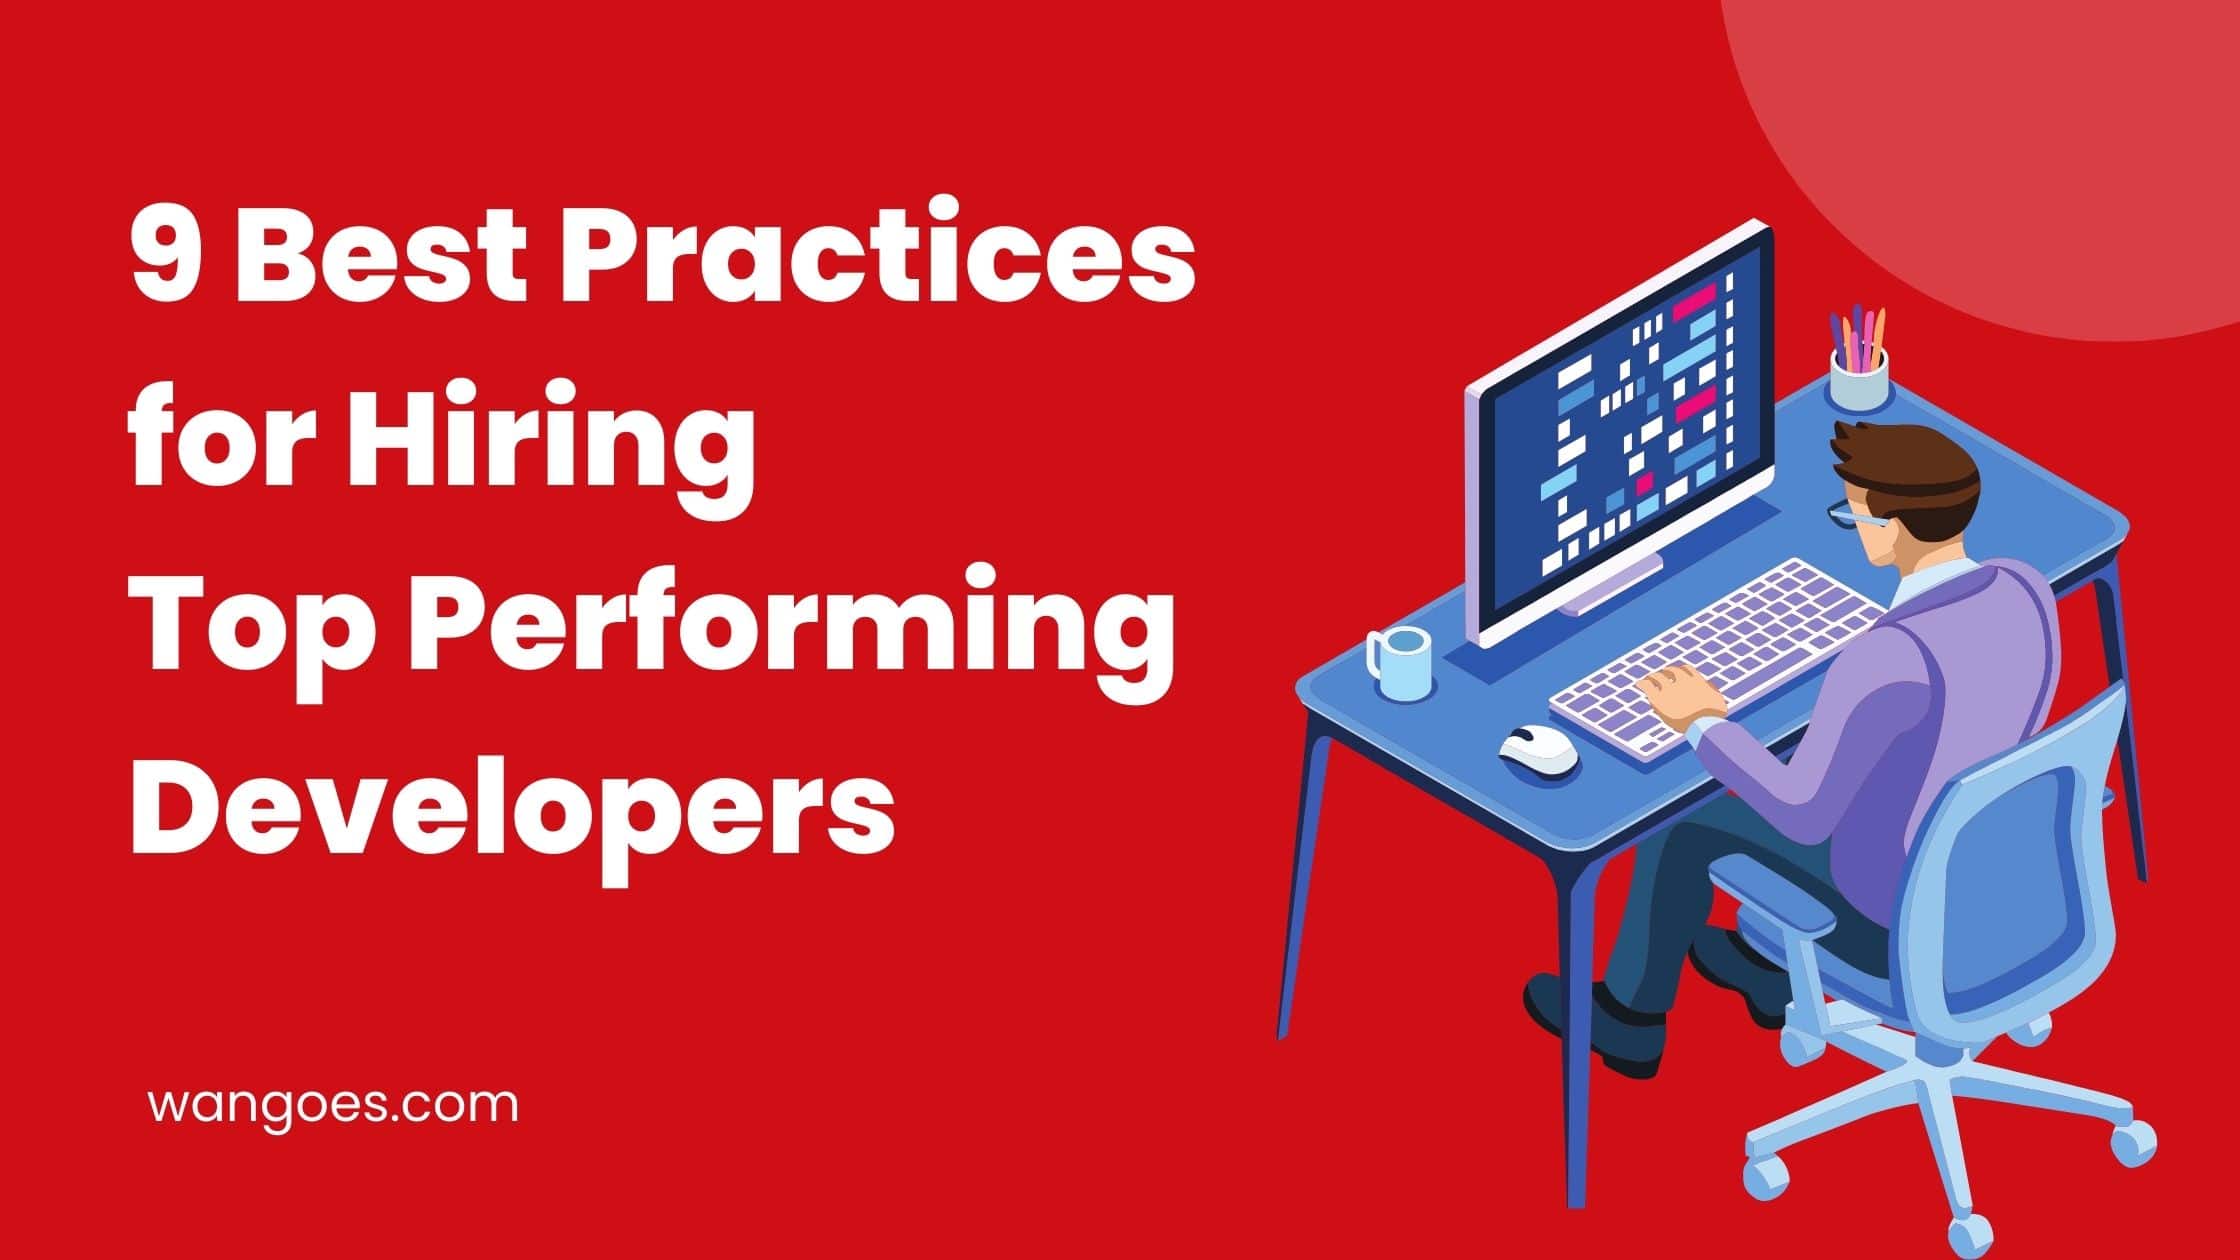 9 Best Practices for Hiring Top Performing Developers